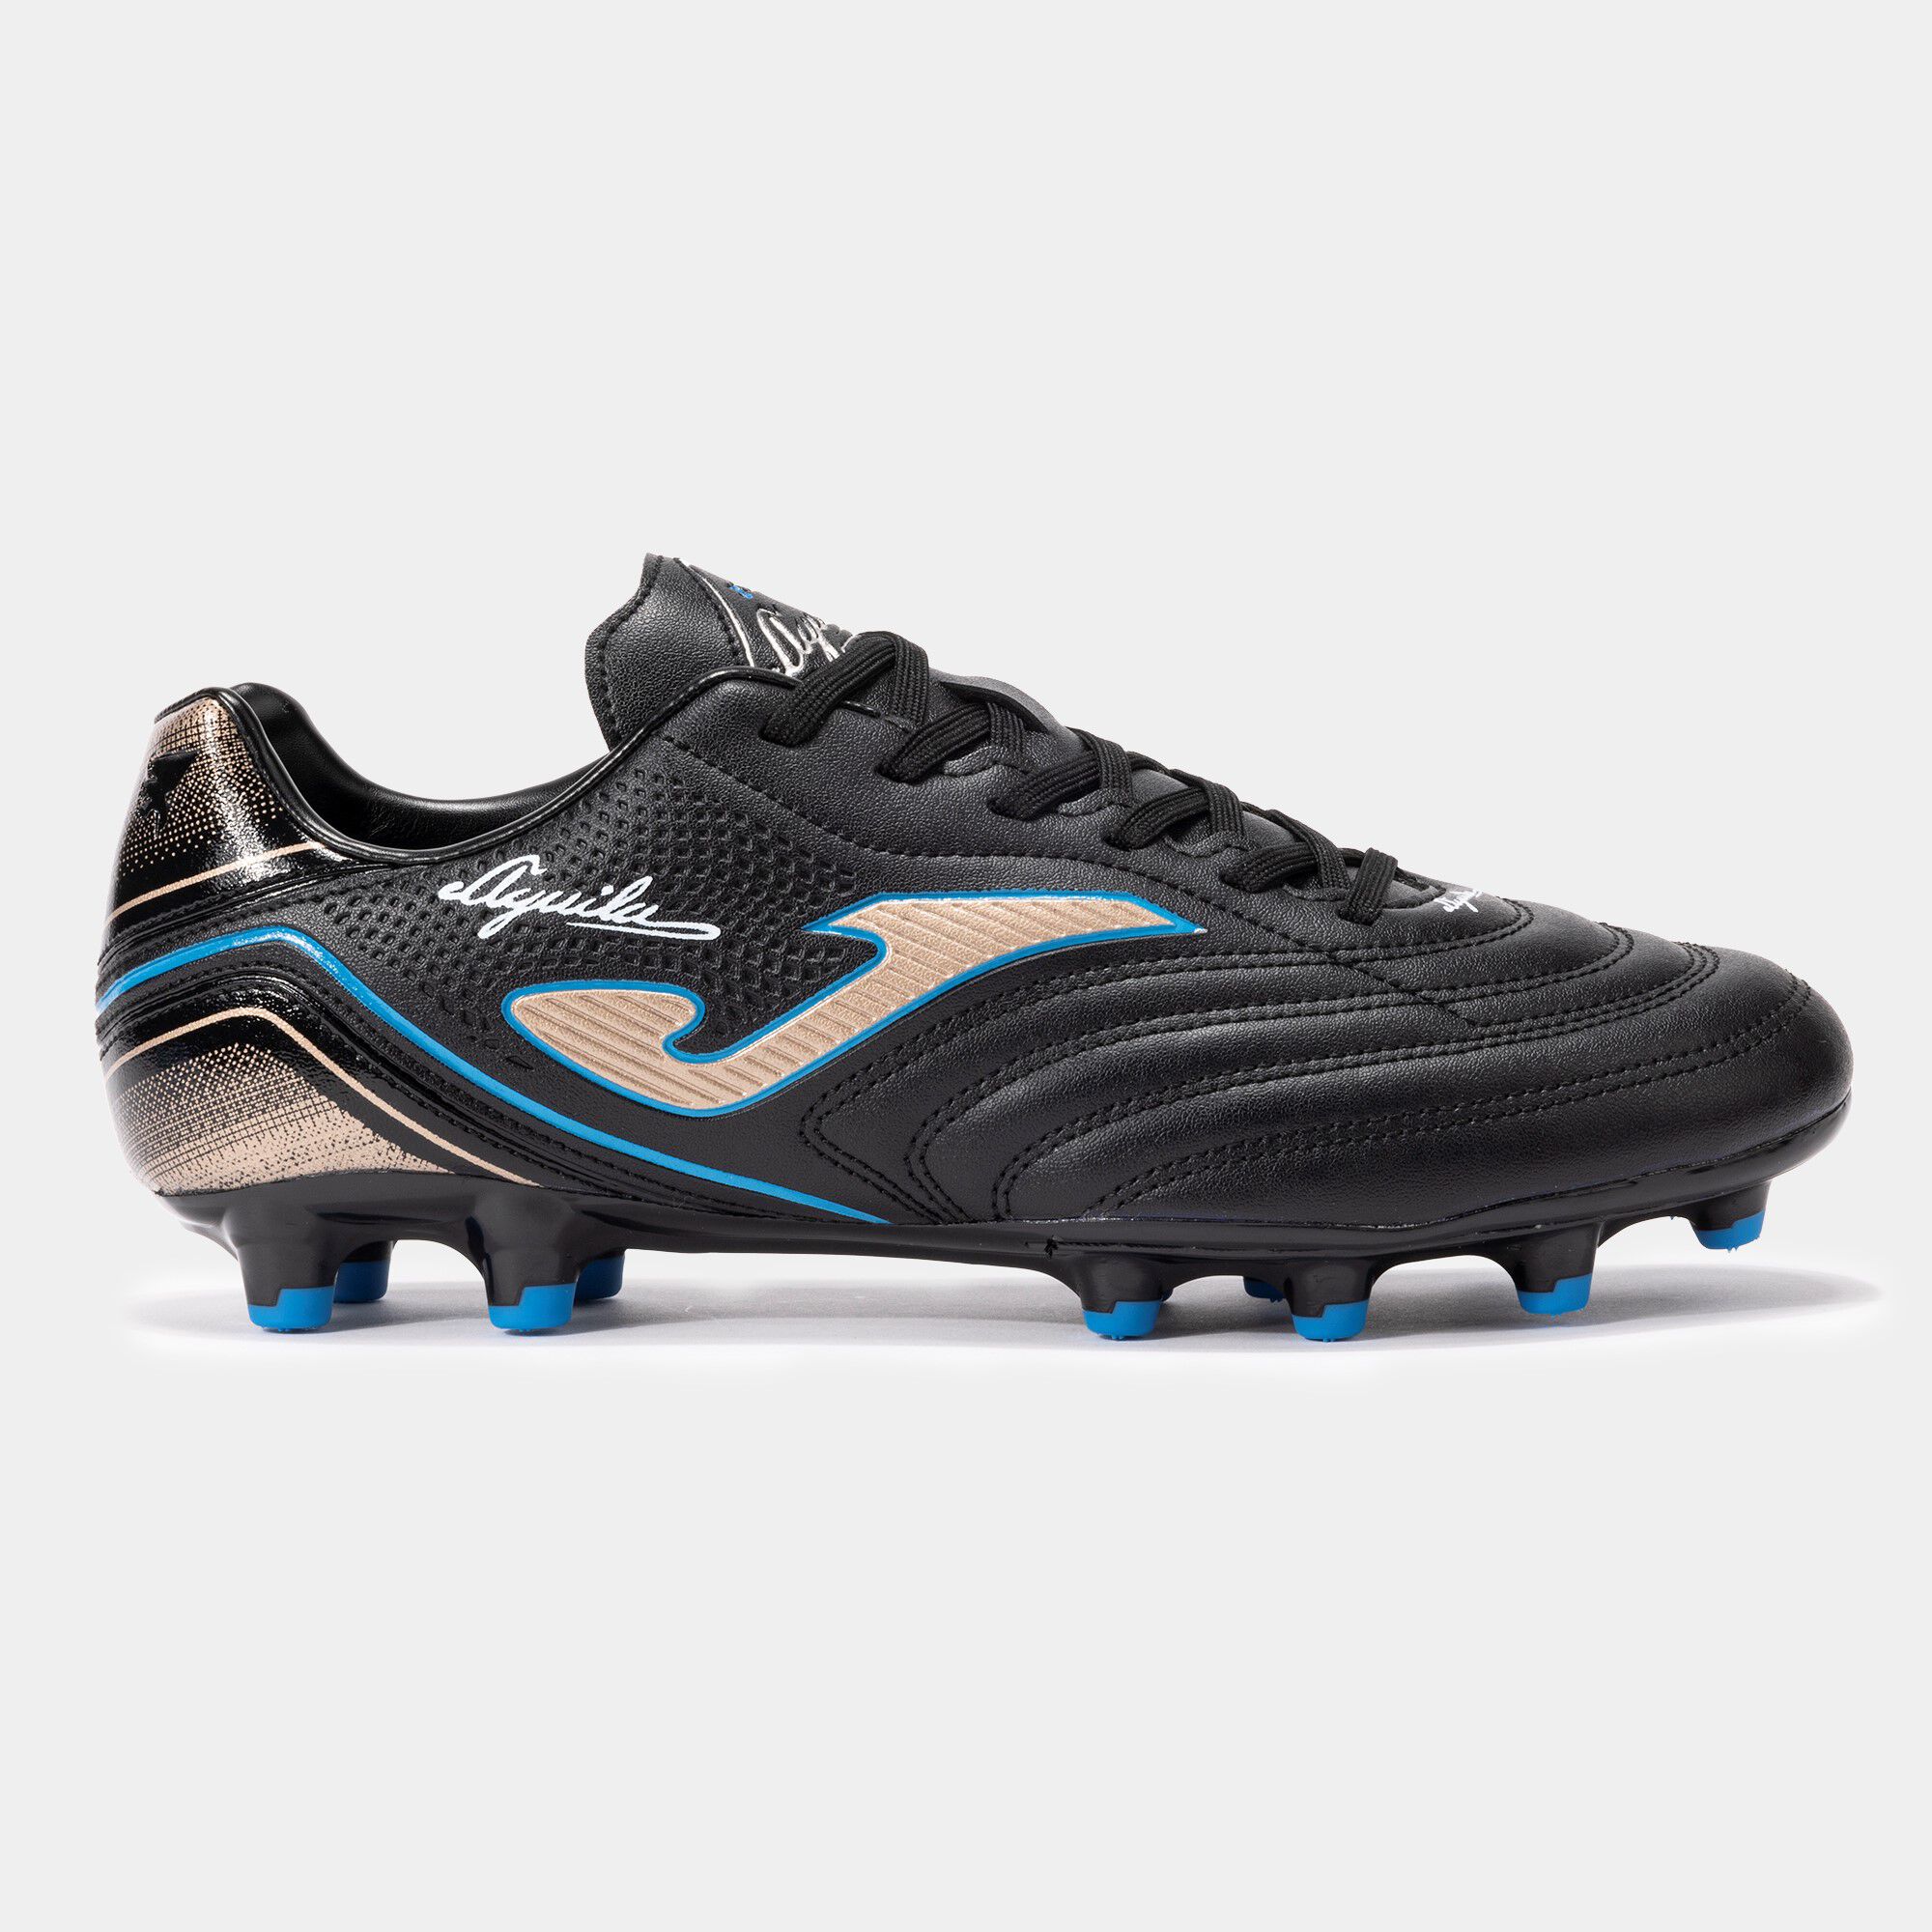 Football boots Aguila 23 firm ground FG black gold